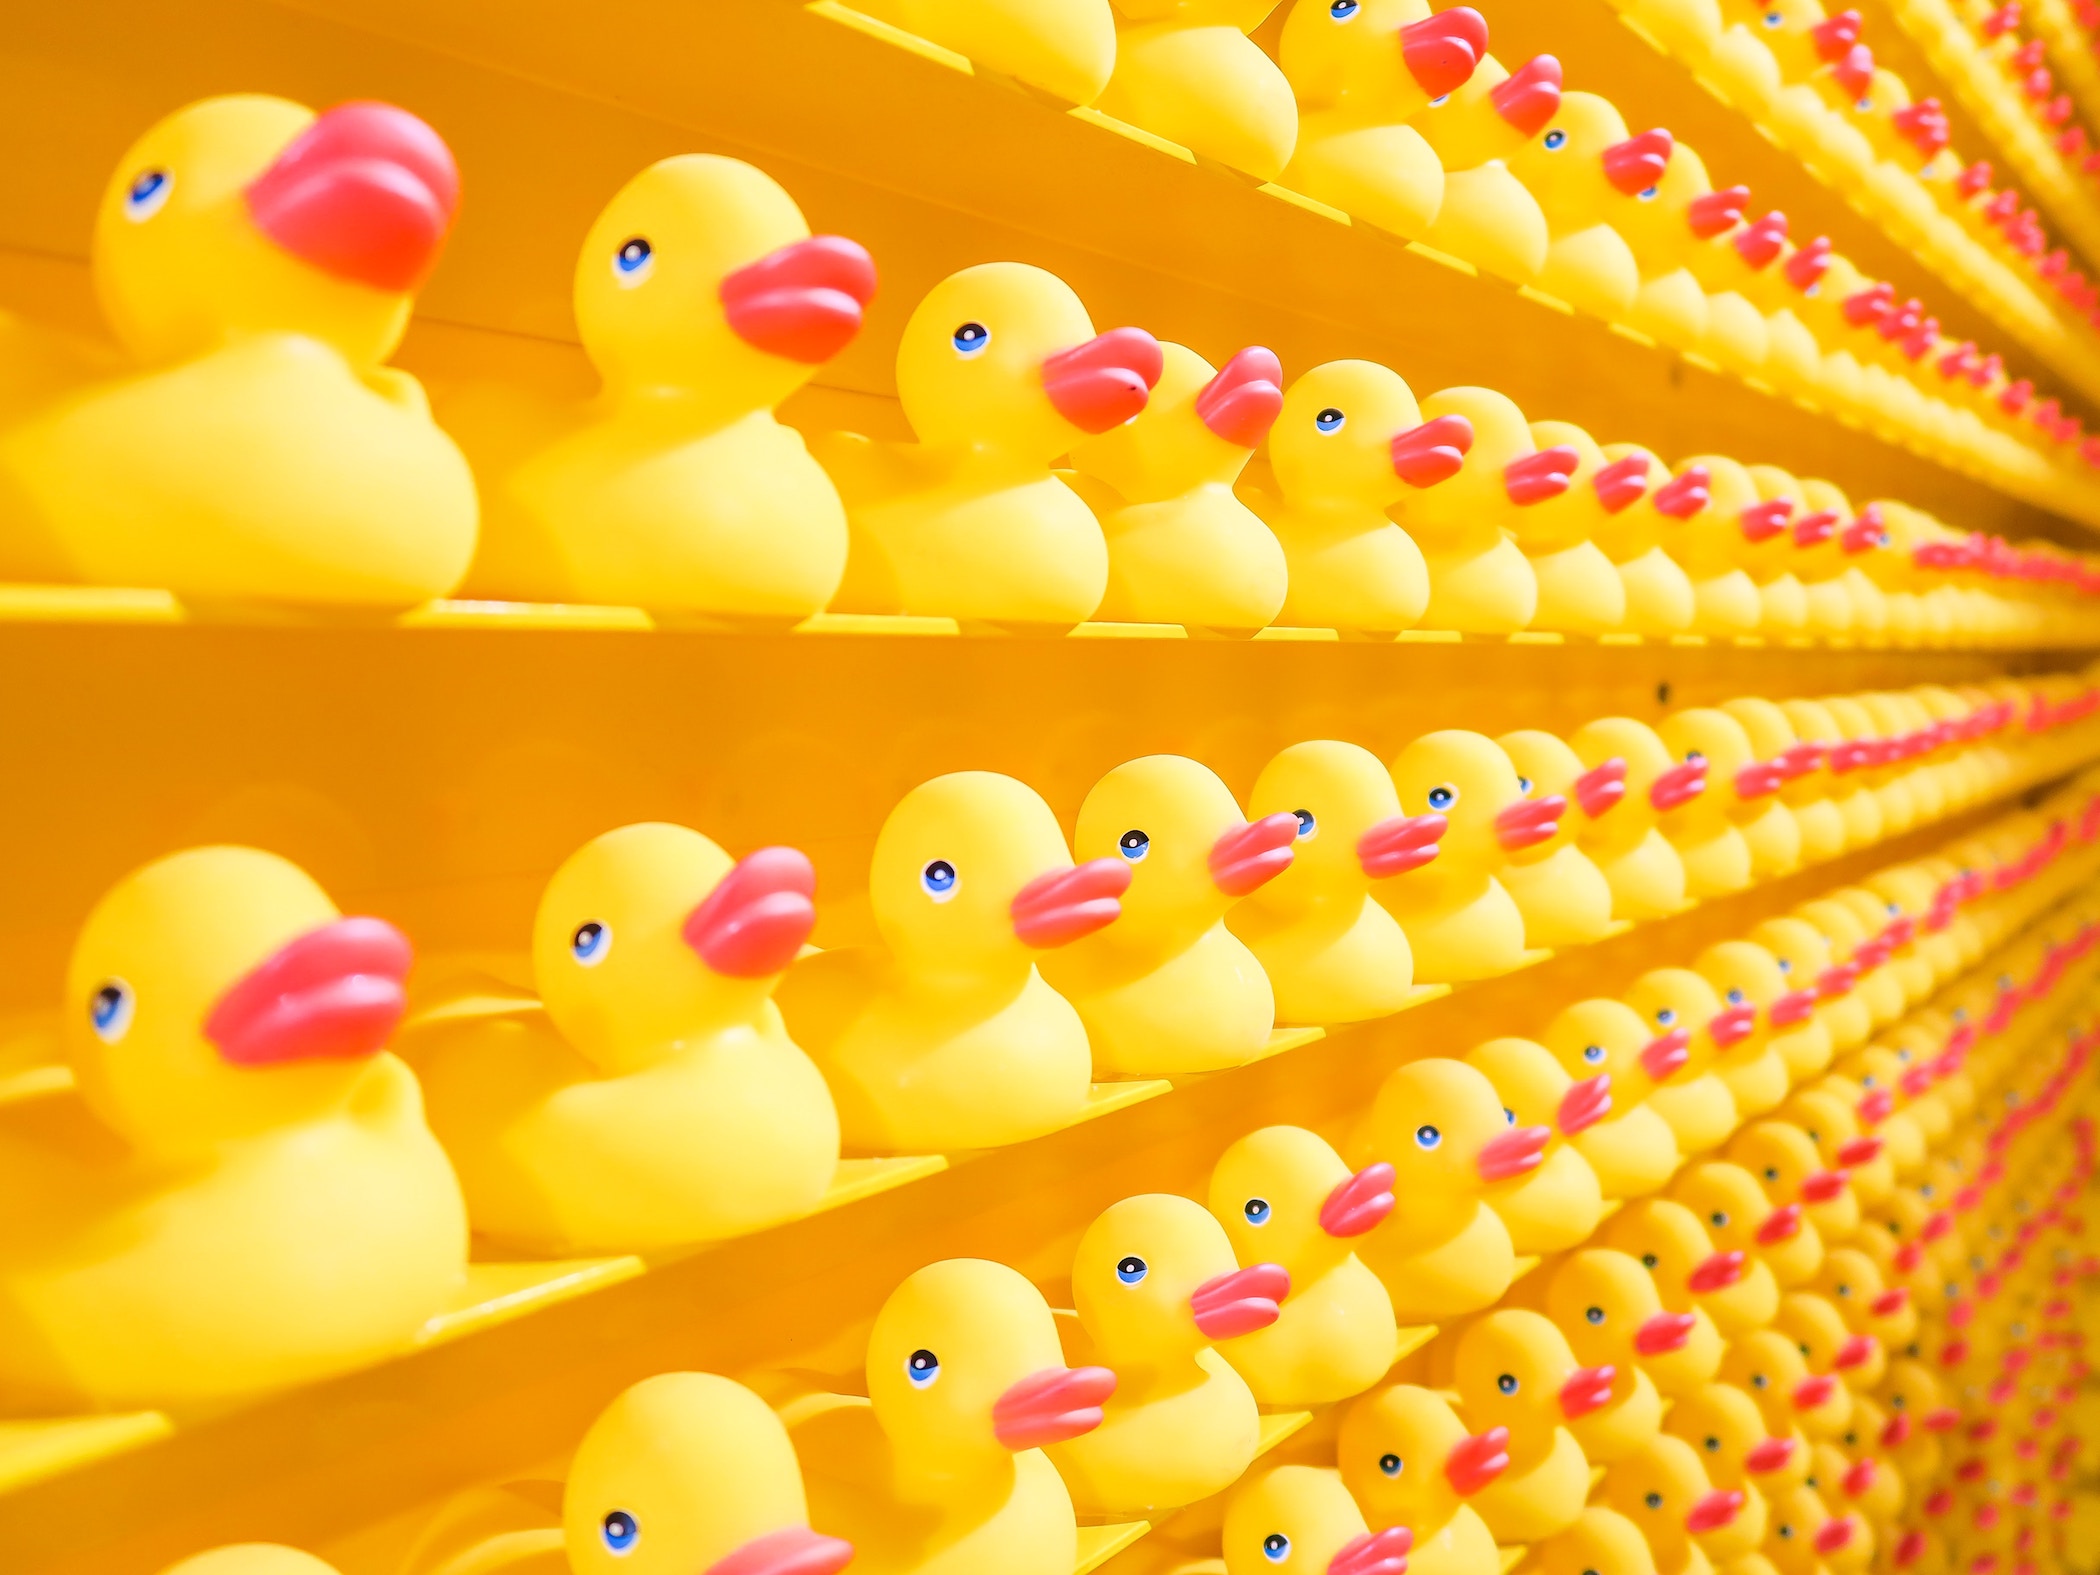 Rubber duckies on a wall